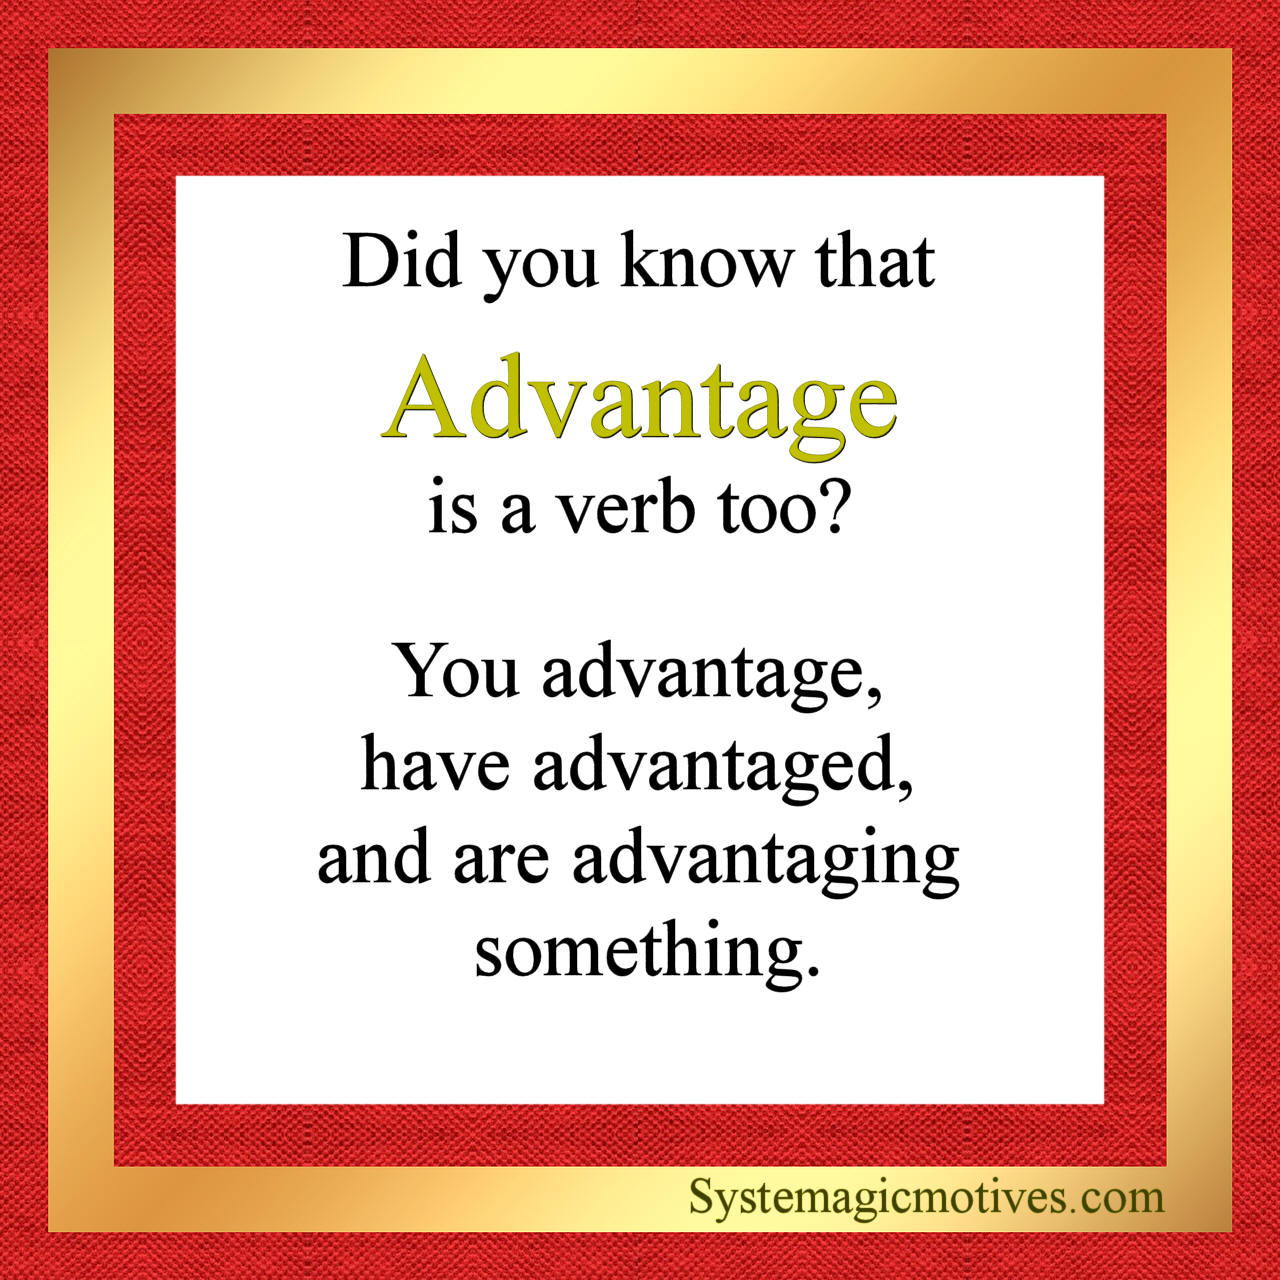 The Definition of Advantage as a Verb